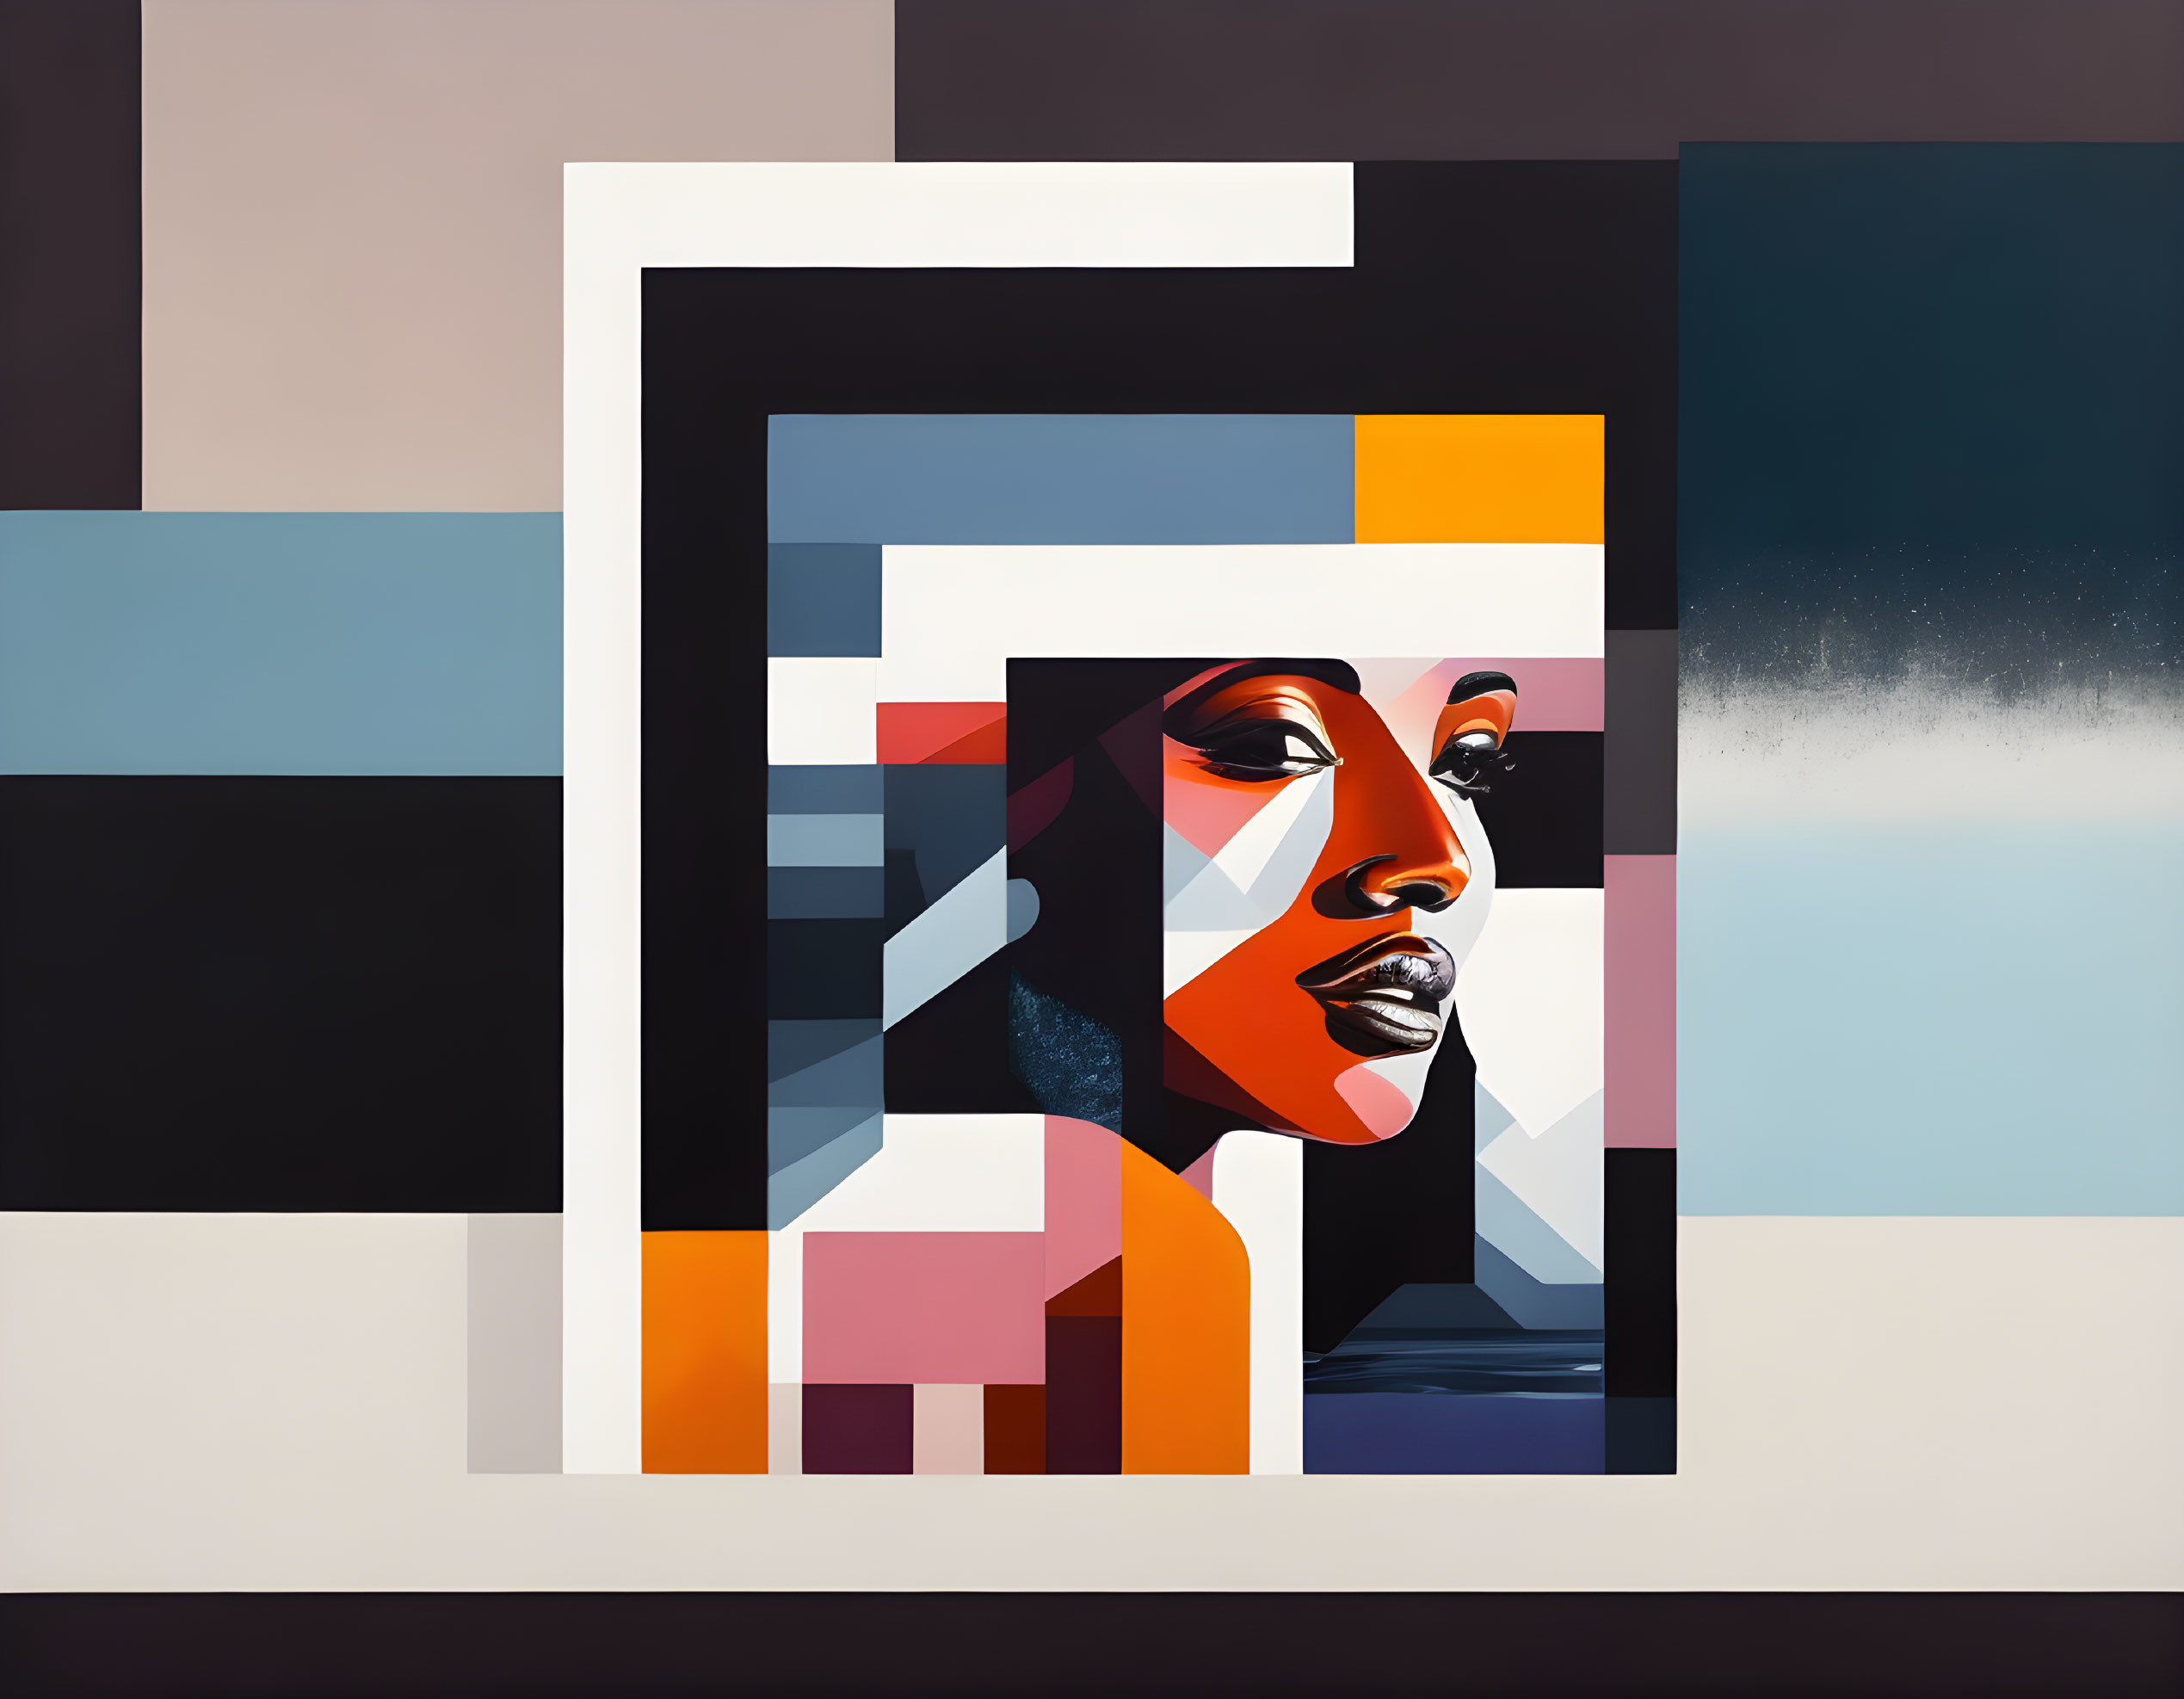 Abstract portrait of woman with geometric shapes in black, white, and earth tones on misty blue backdrop